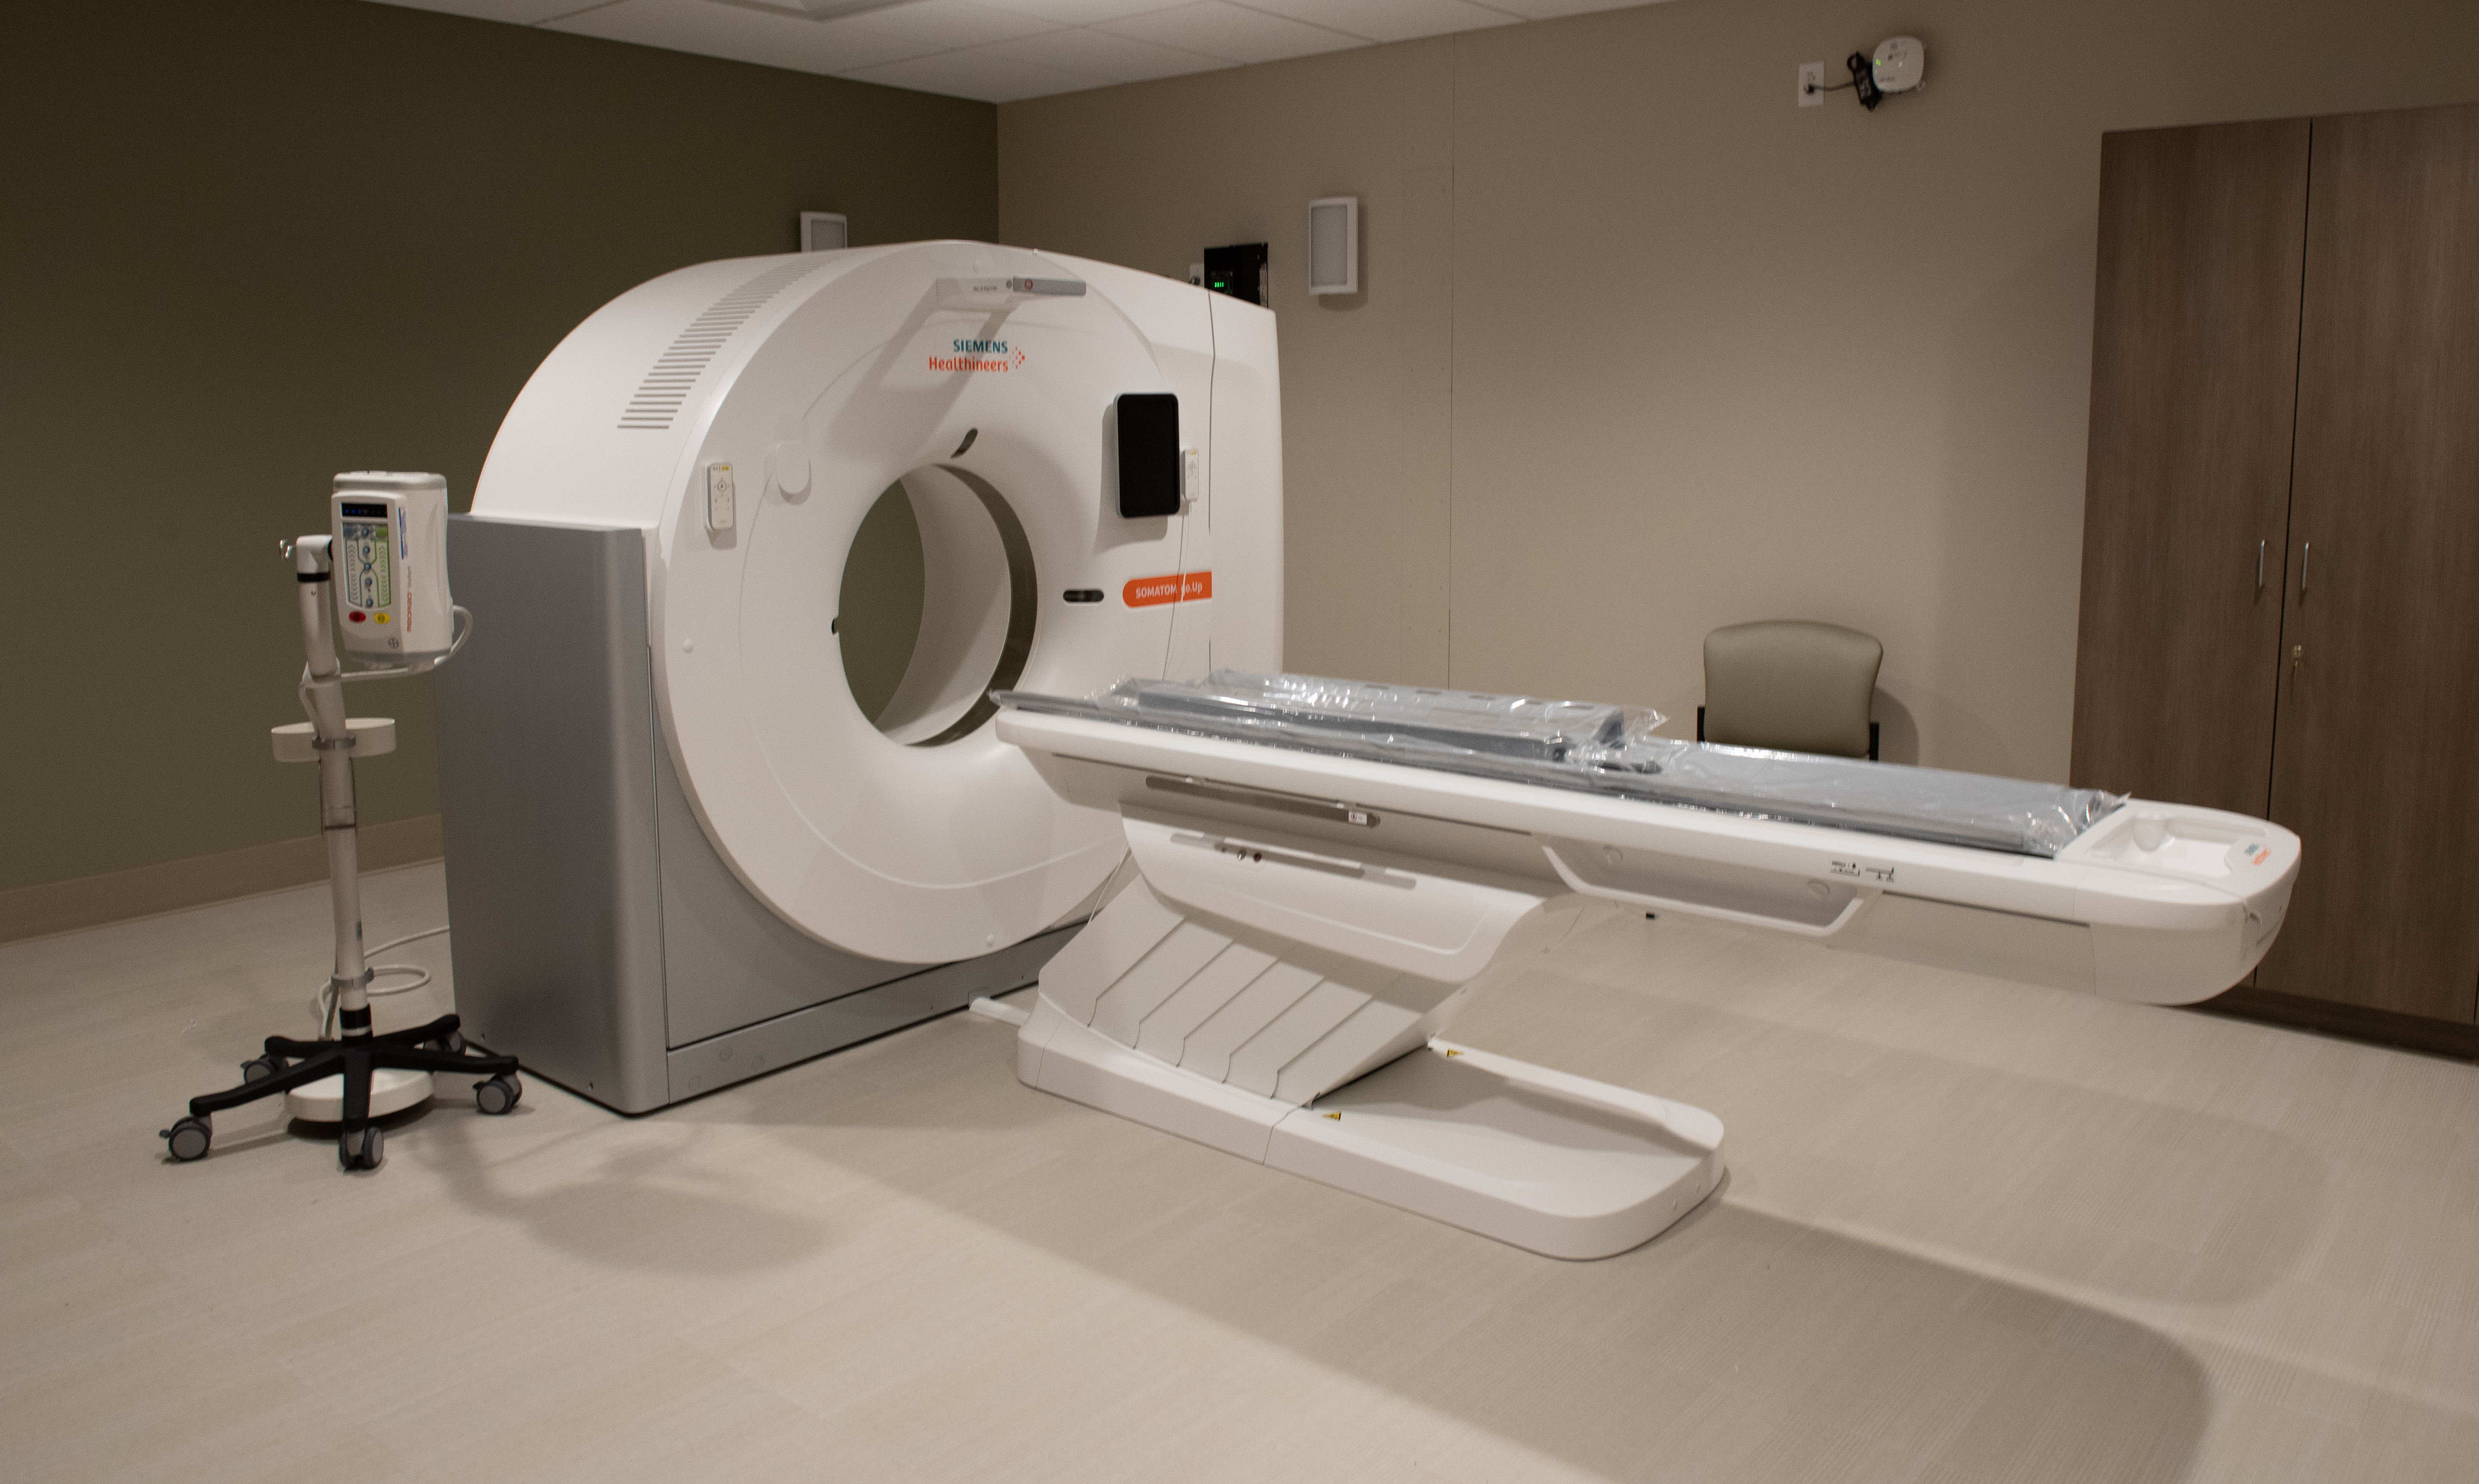 a CT scan imaging machine at the sicklerville location